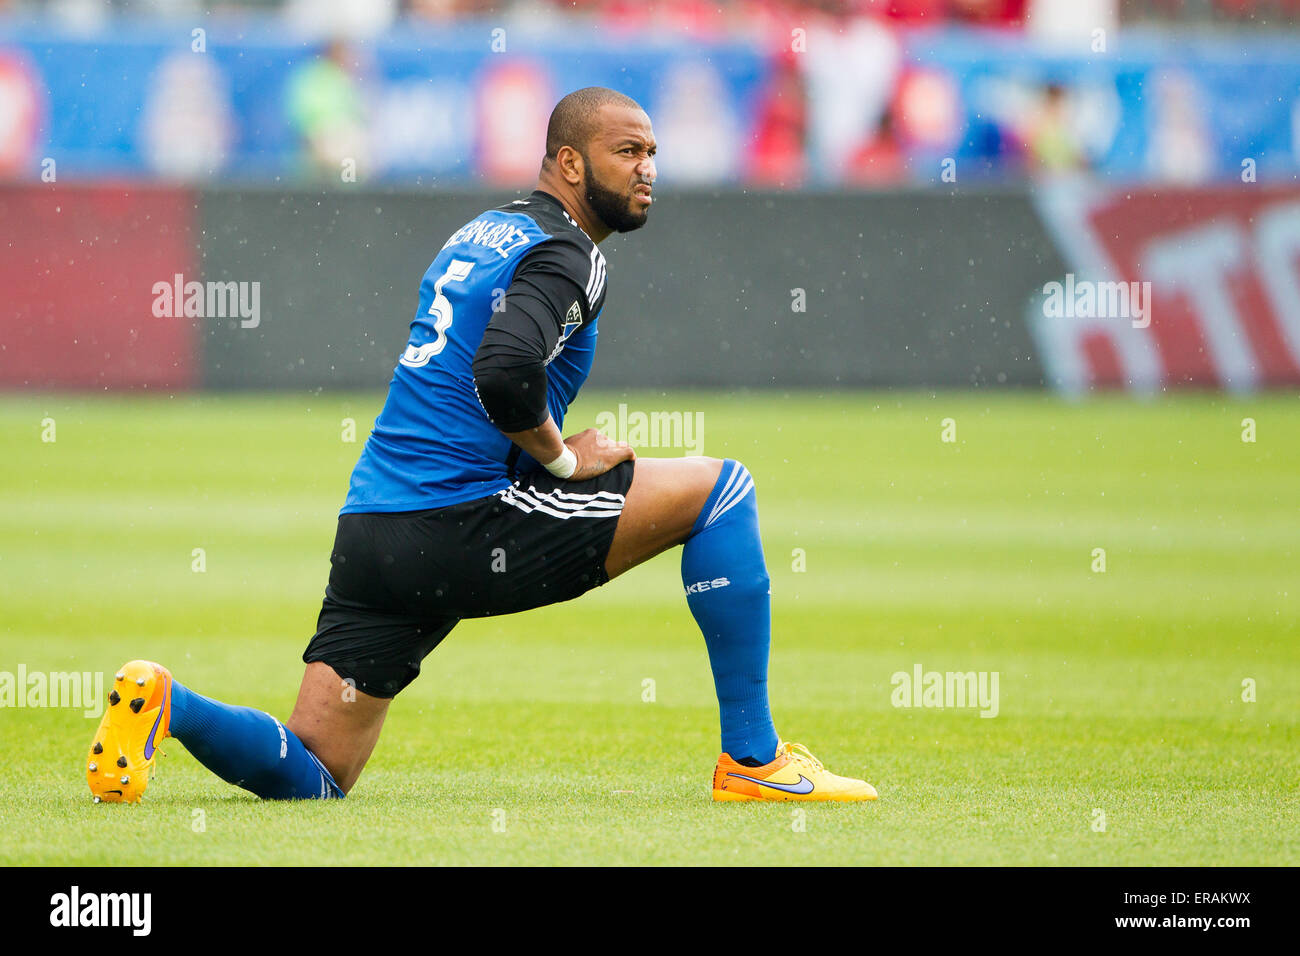 Toronto, Ontario, Canada. 30th May, 2015. Victor Bernardez (5) of the Earthquakes before kick off at a MLS game between the Toronto FC and San Jose Earthquakes at BMO field in Toronto, Ontario, Canada. Credit:  csm/Alamy Live News Stock Photo